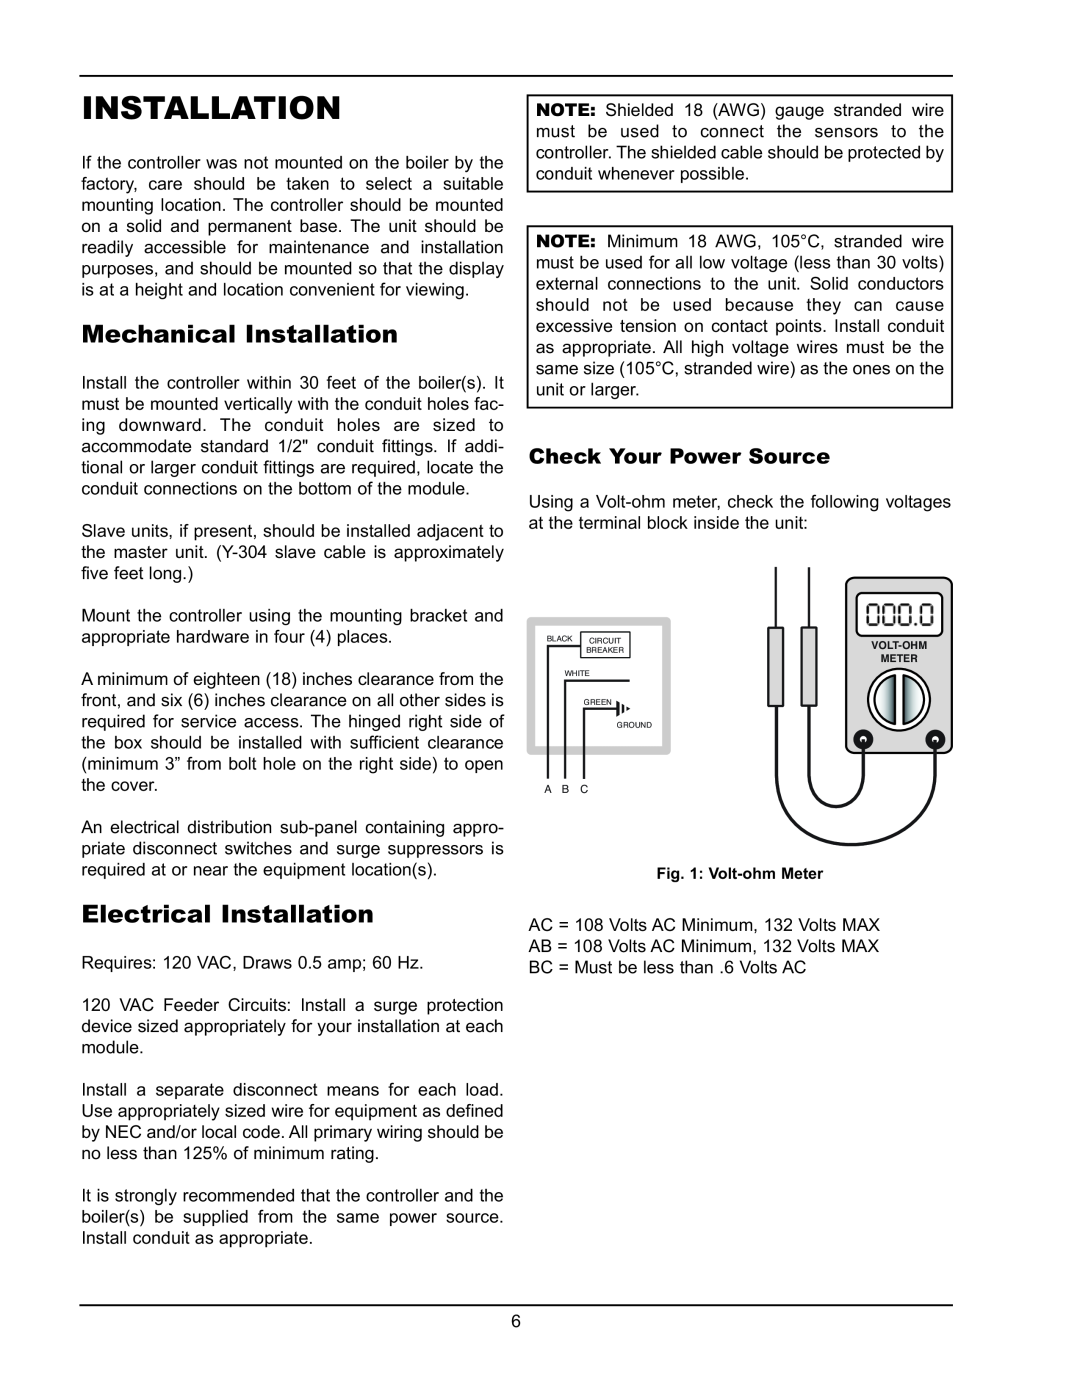 Raypak Y-200 manual Mechanical Installation, Electrical Installation, Check Your Power Source 